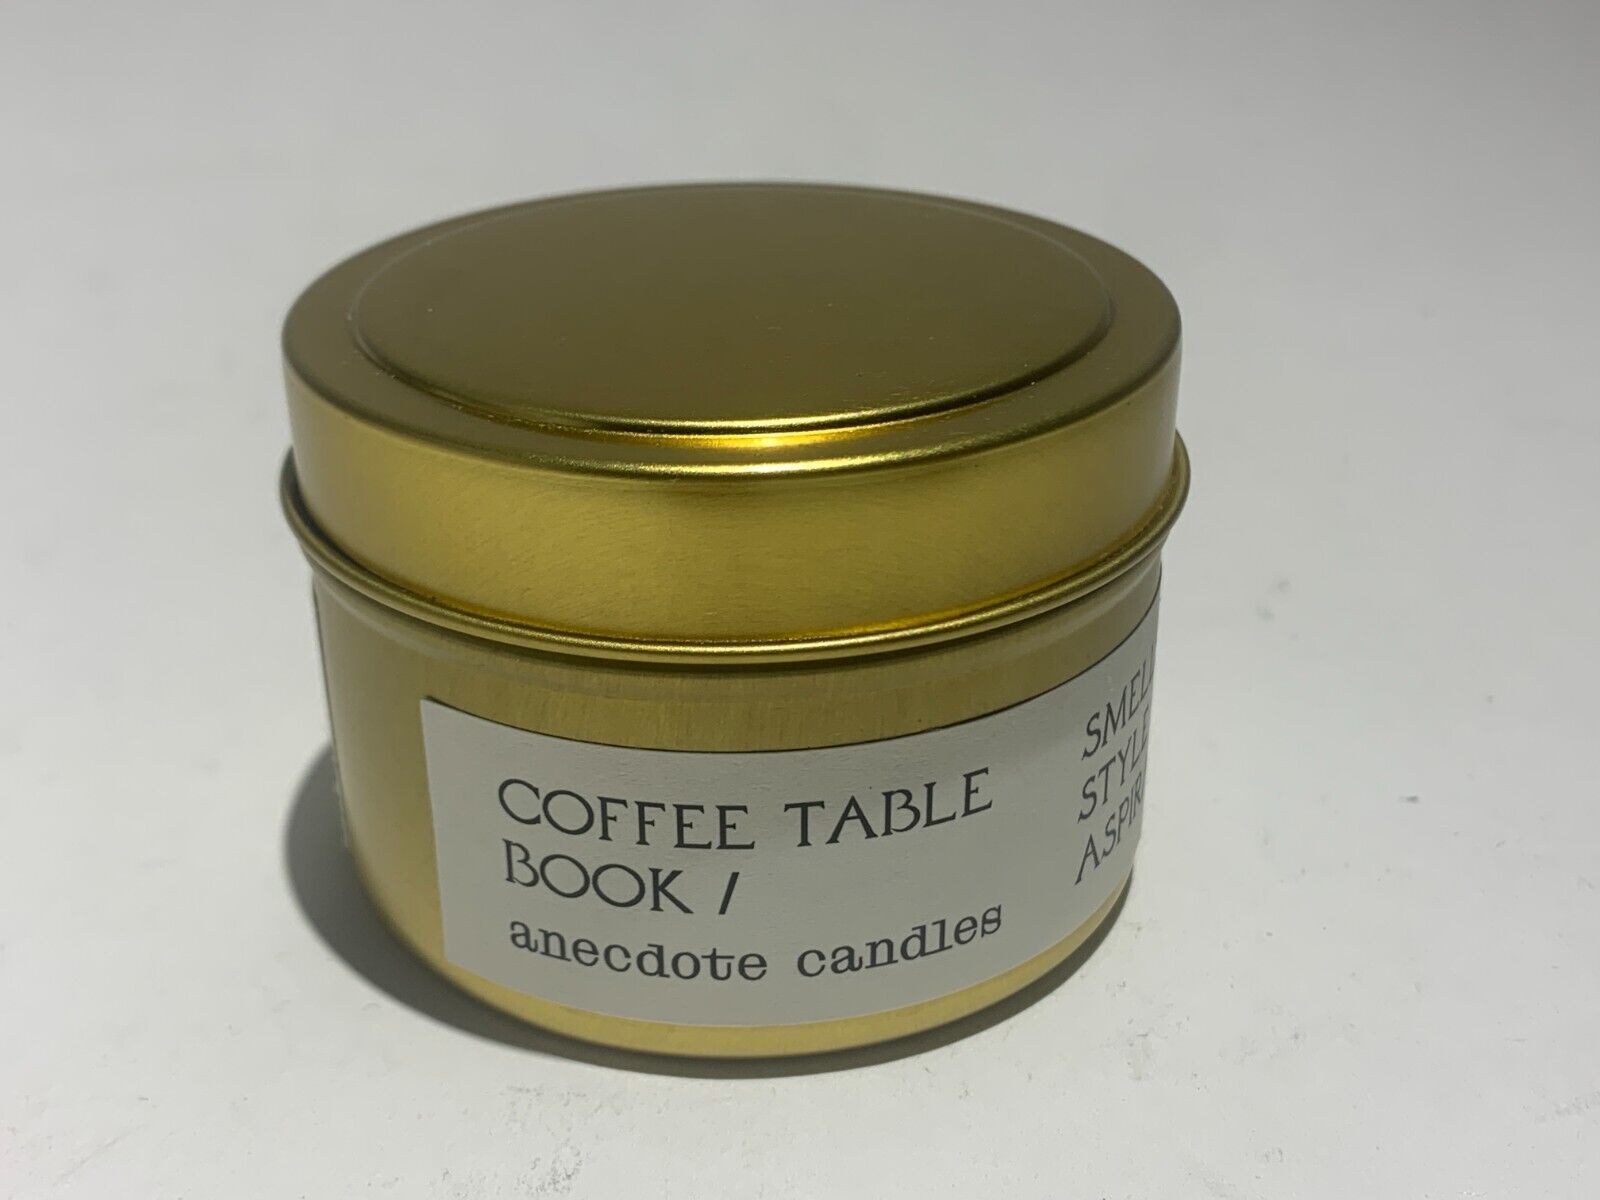 COFFEE TABLE BOOK / ANECDOTE CANDLES Vetiver and Citrus /  NEW DENTED TRAVEL TIN - $14.00